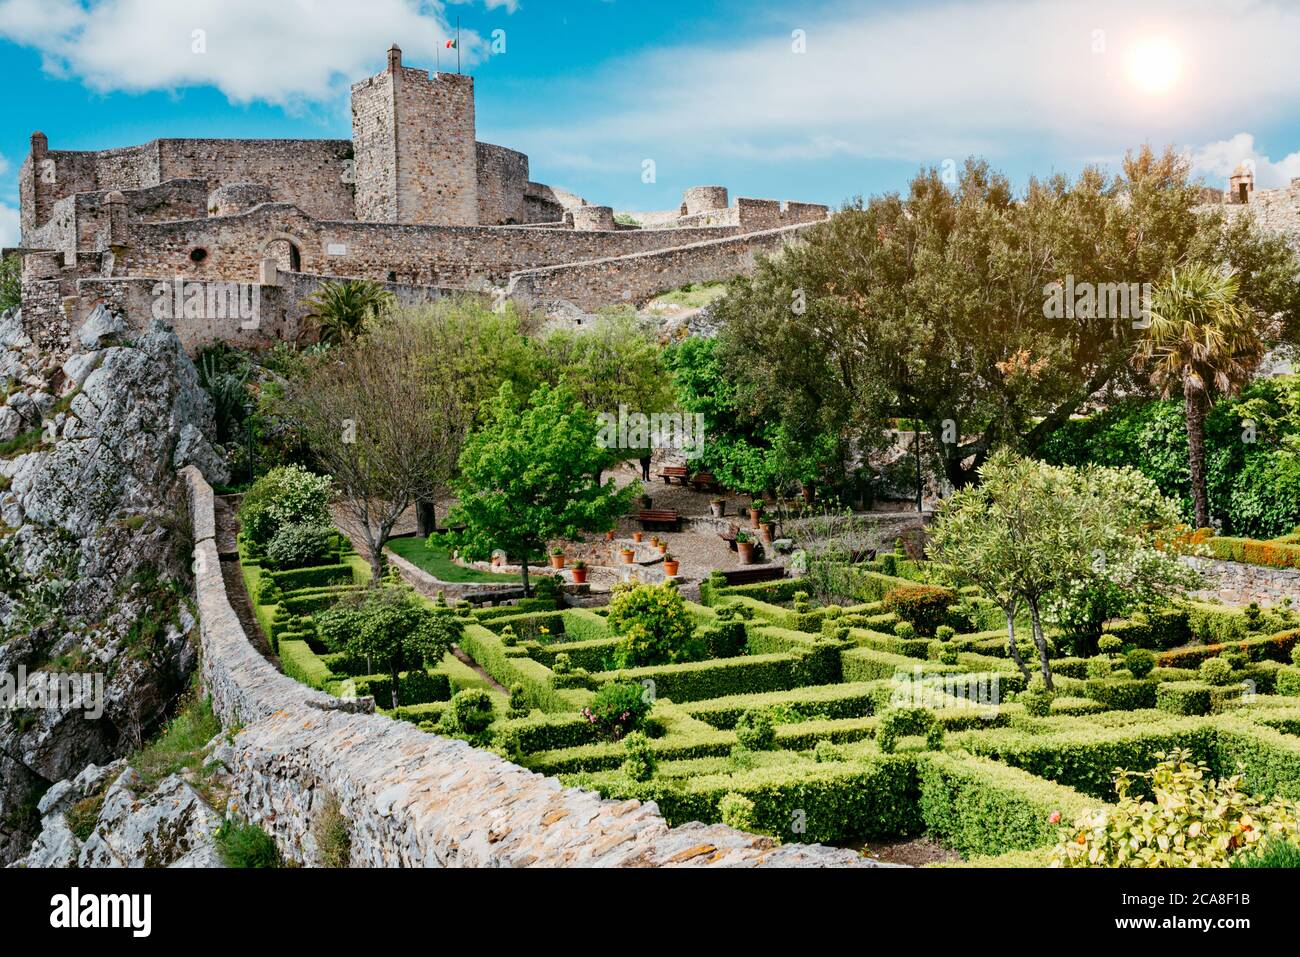 Panoramic view of Gardens and medieval castle from Marvao, Portalegre, Alentejo Region, Portugal. Stock Photo